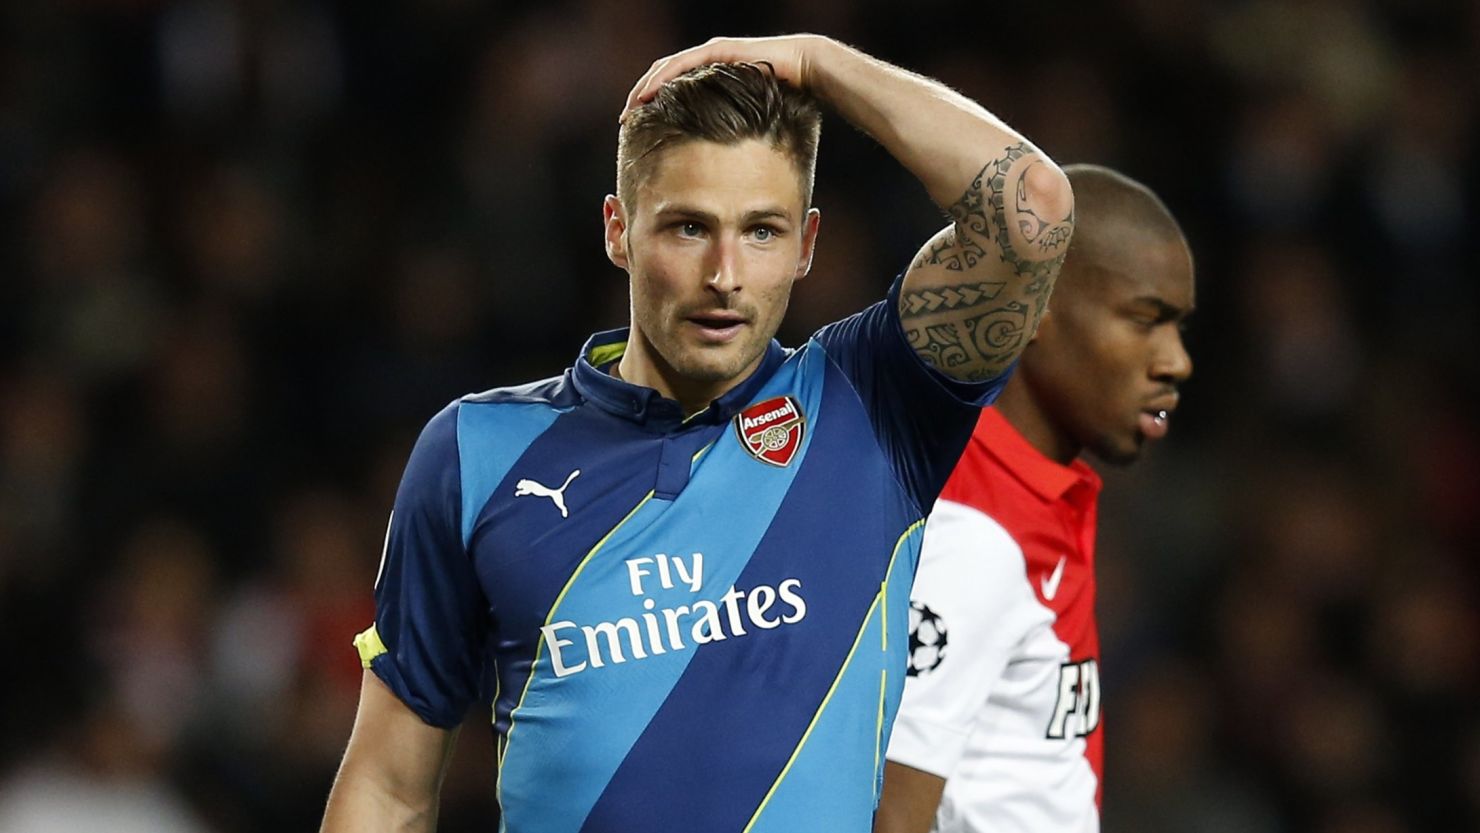 Olivier Giroud scored Arsenal's first goal during their second leg tie in Monaco.